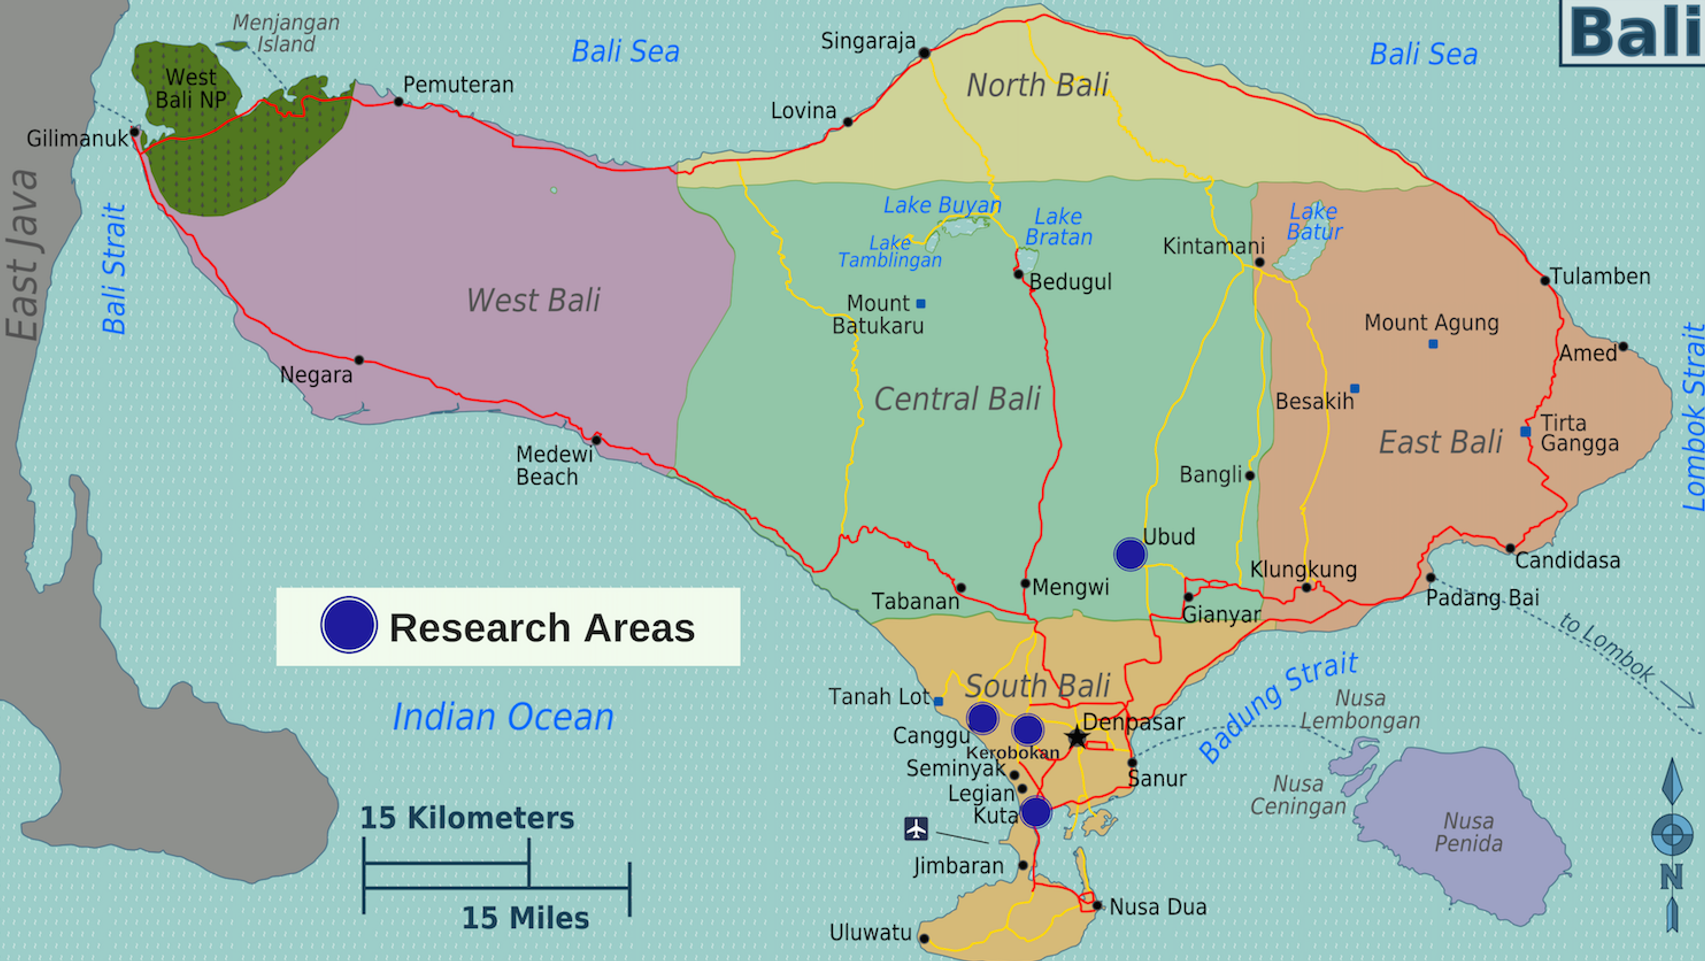 Map of Bali and Research Areas - Authors Burmesedays, Peter Fitzgerald, Marco Adda [CC BY-SA 4.0-3.0-2.5-2.0-1.0])